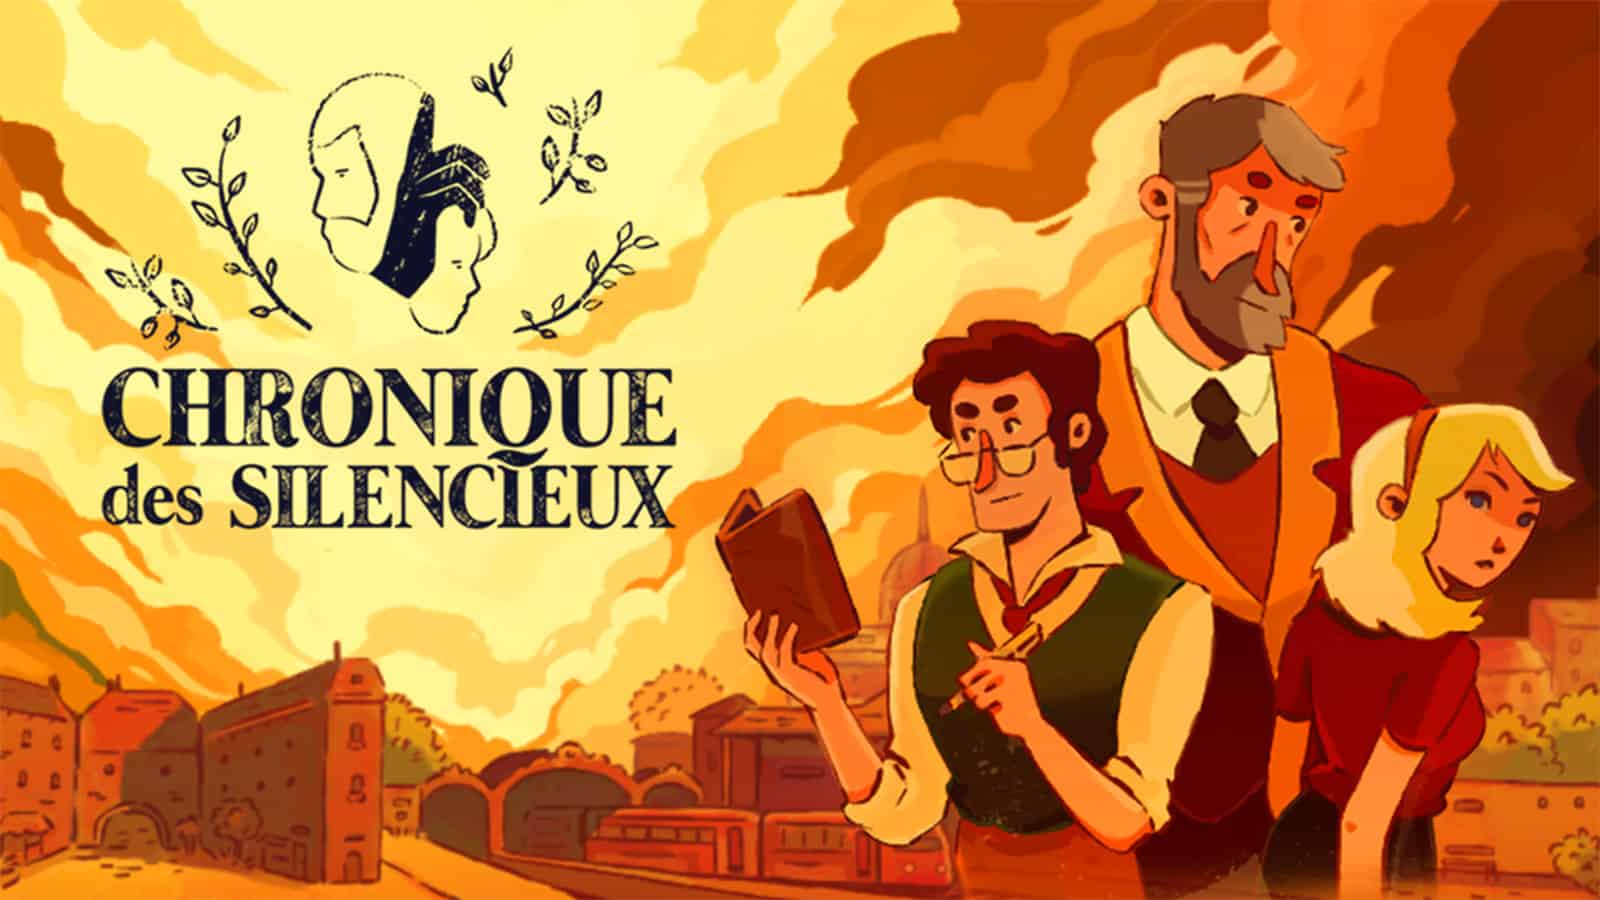 Detective Mystery Game Chronique des Silencieux Gets Steam Demo